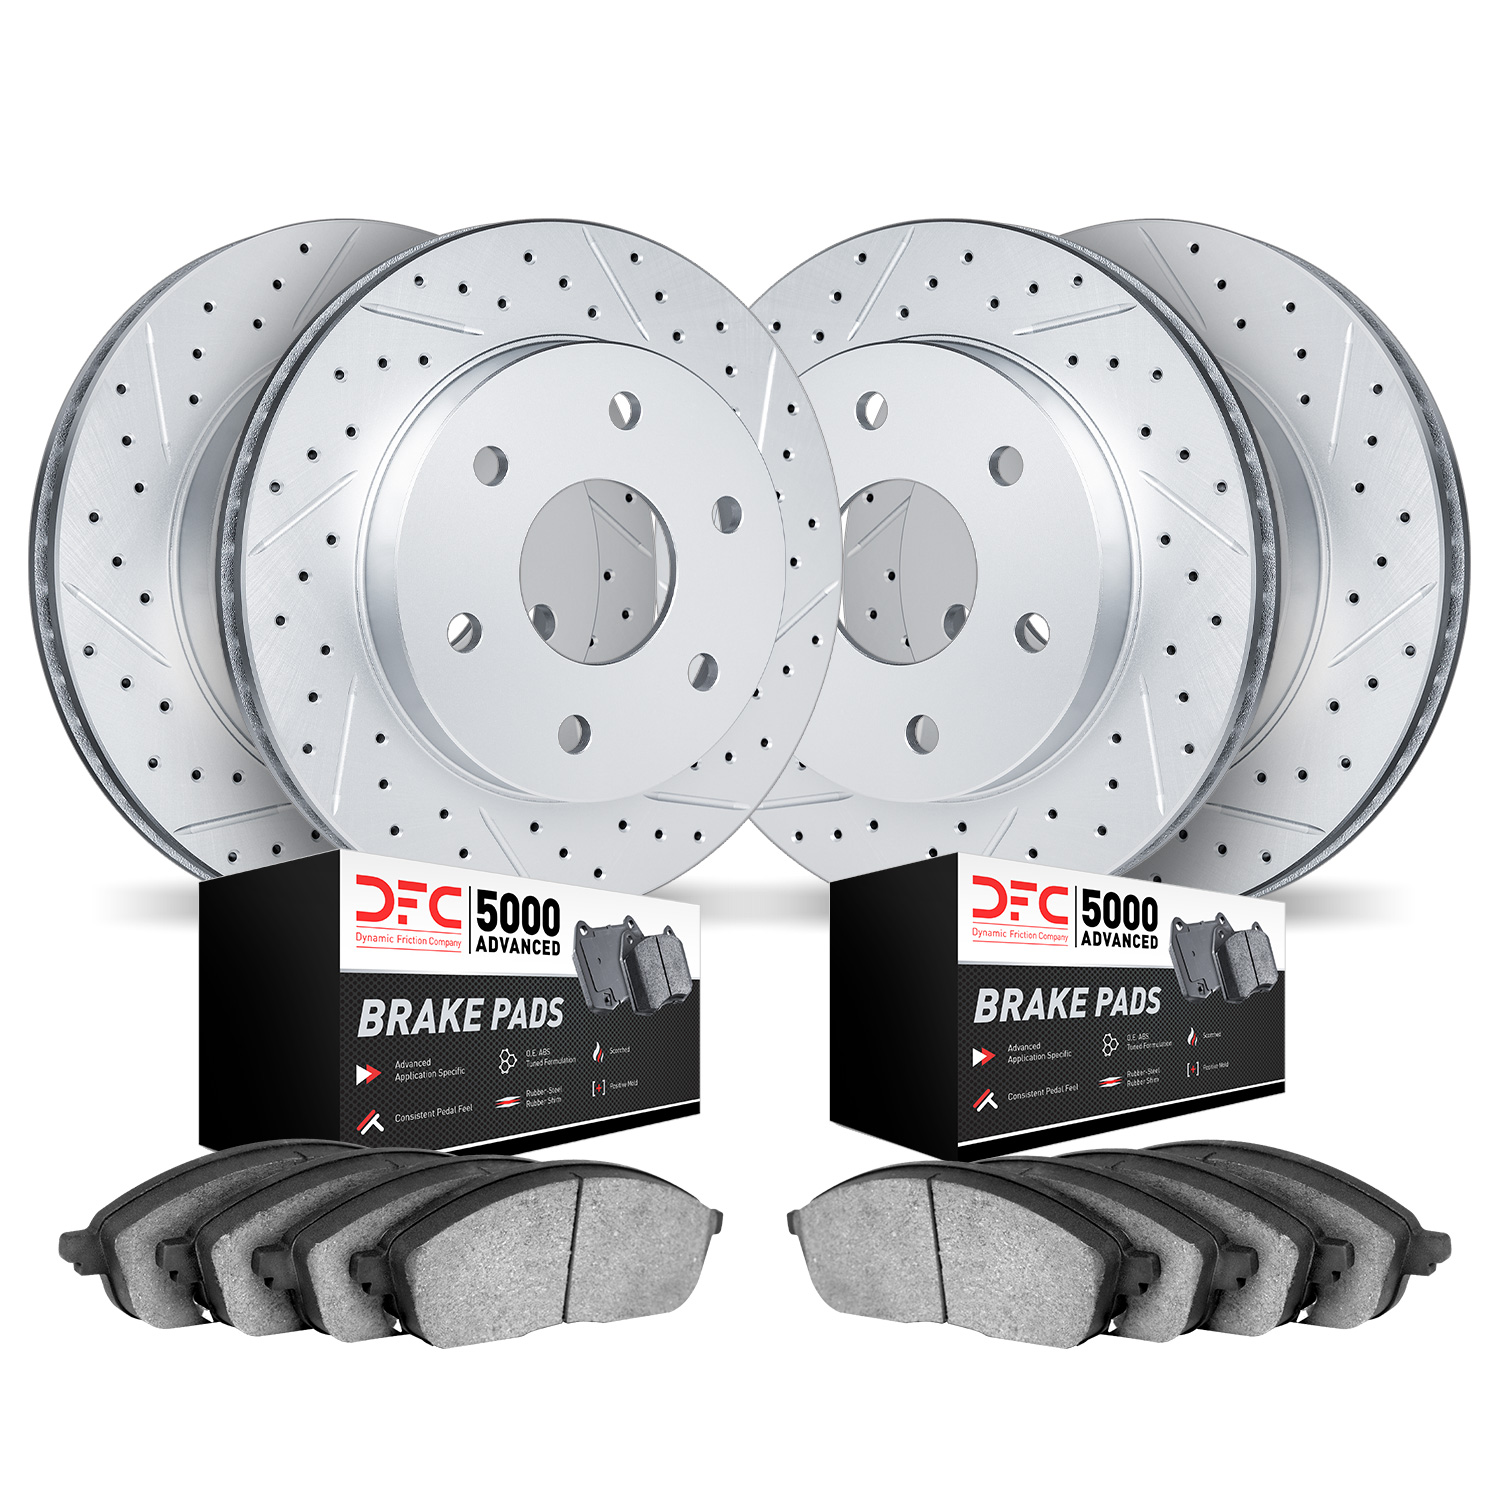 2504-37004 Geoperformance Drilled/Slotted Rotors w/5000 Advanced Brake Pads Kit, 2001-2004 Multiple Makes/Models, Position: Fron